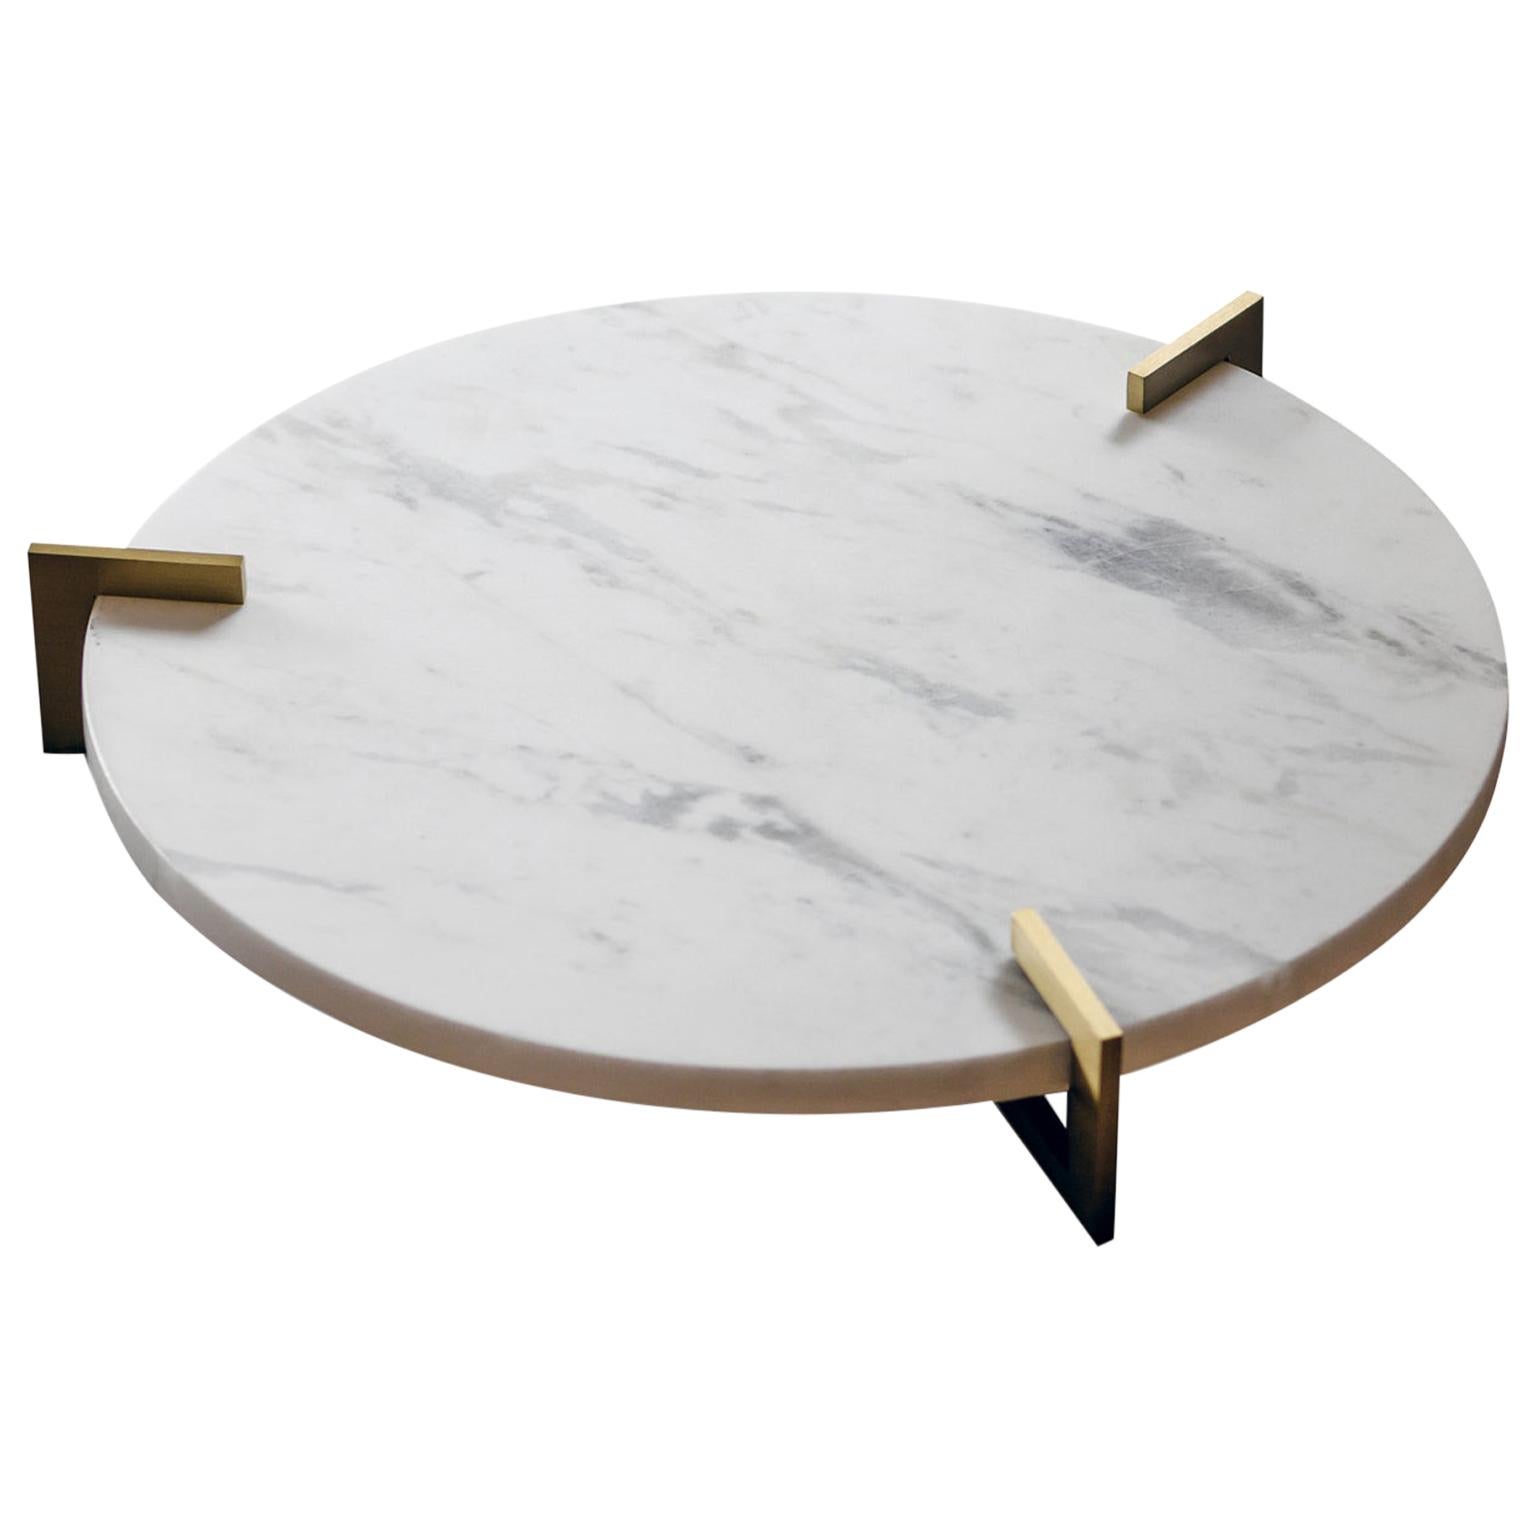 Contemporary Handcrafted Round Tray "Ophelos" in Marble and Brass by Anaktae